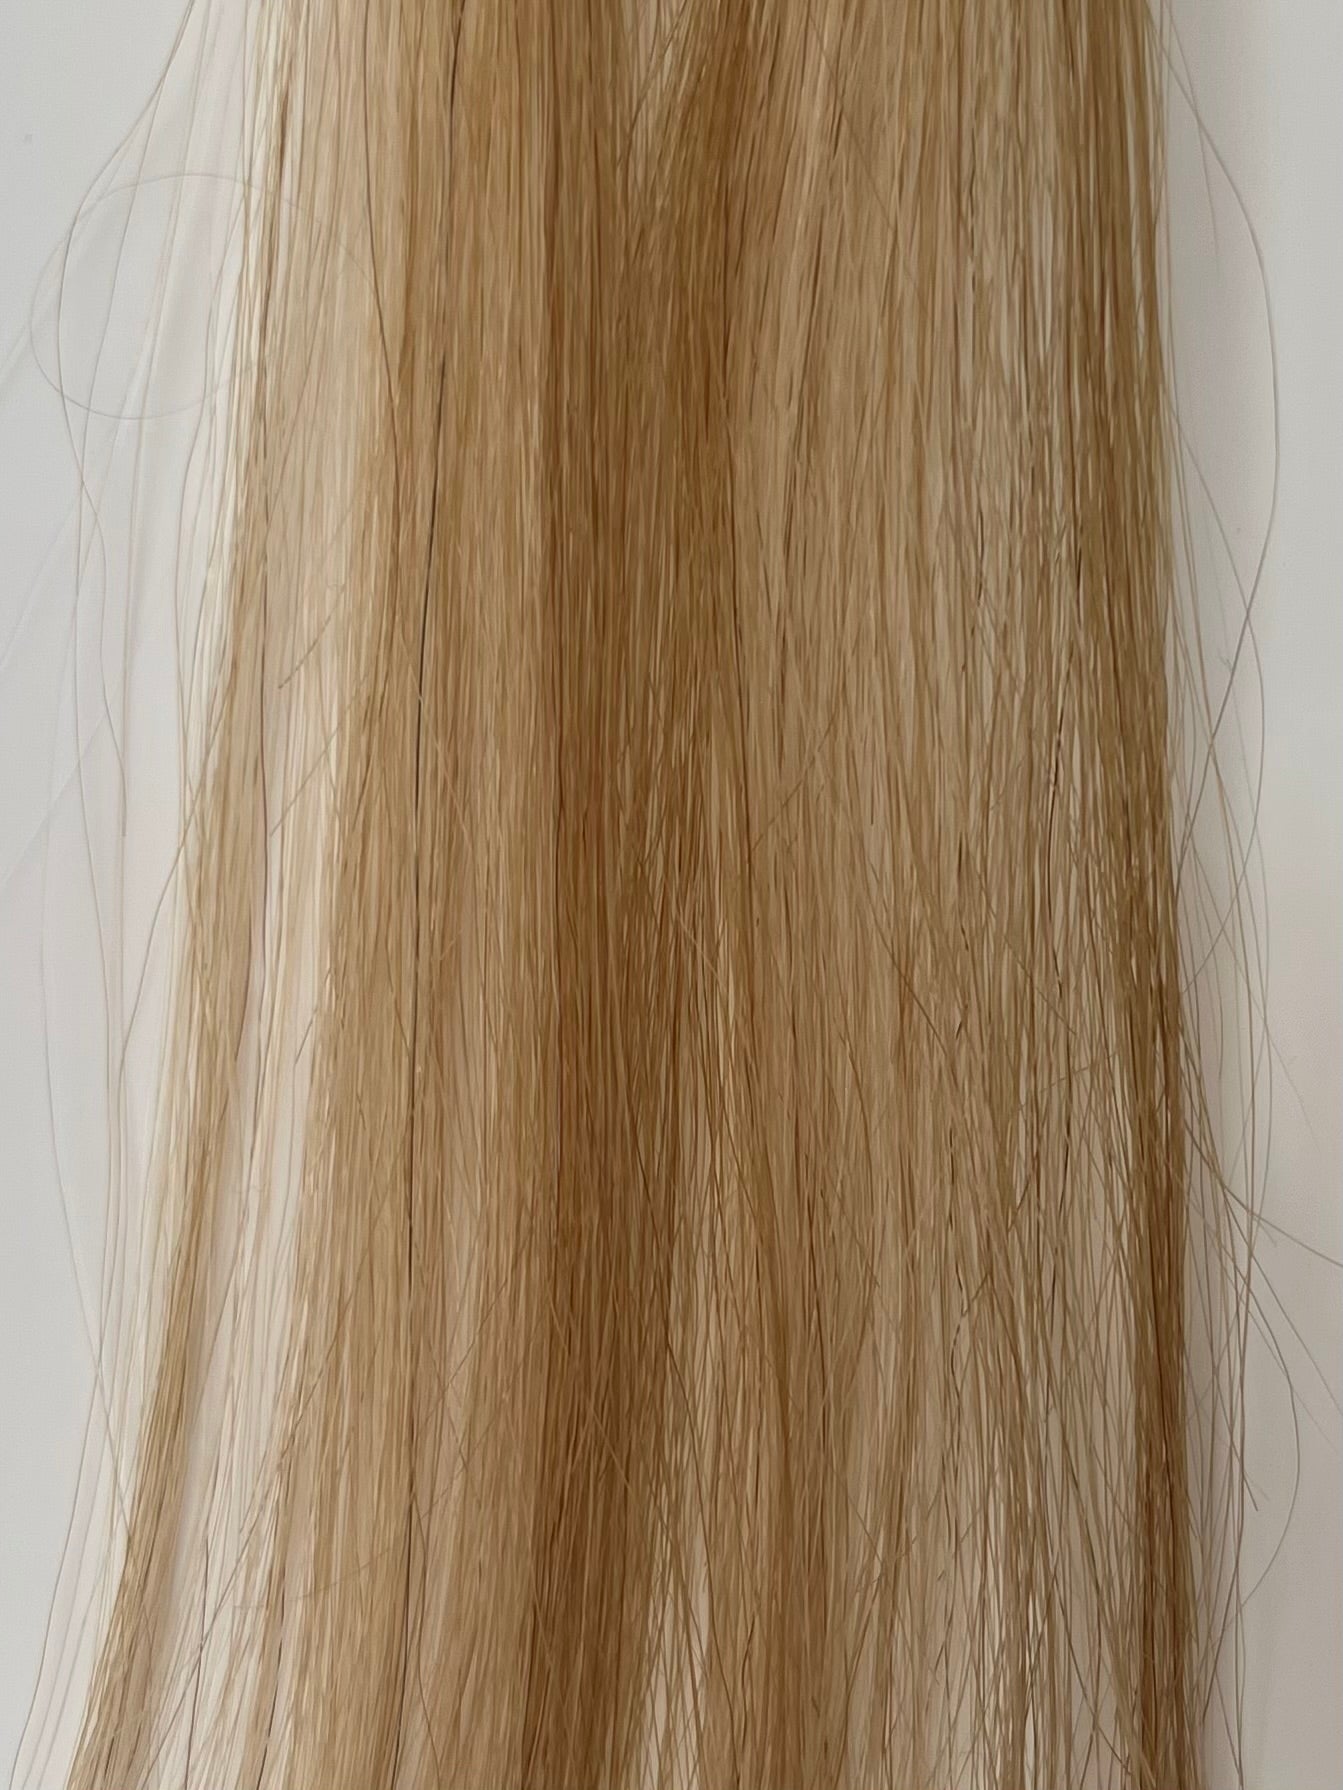 RETAIL TAPE IN EXTENSIONS - HIGHLIGHTED - PARISIAN BLONDE